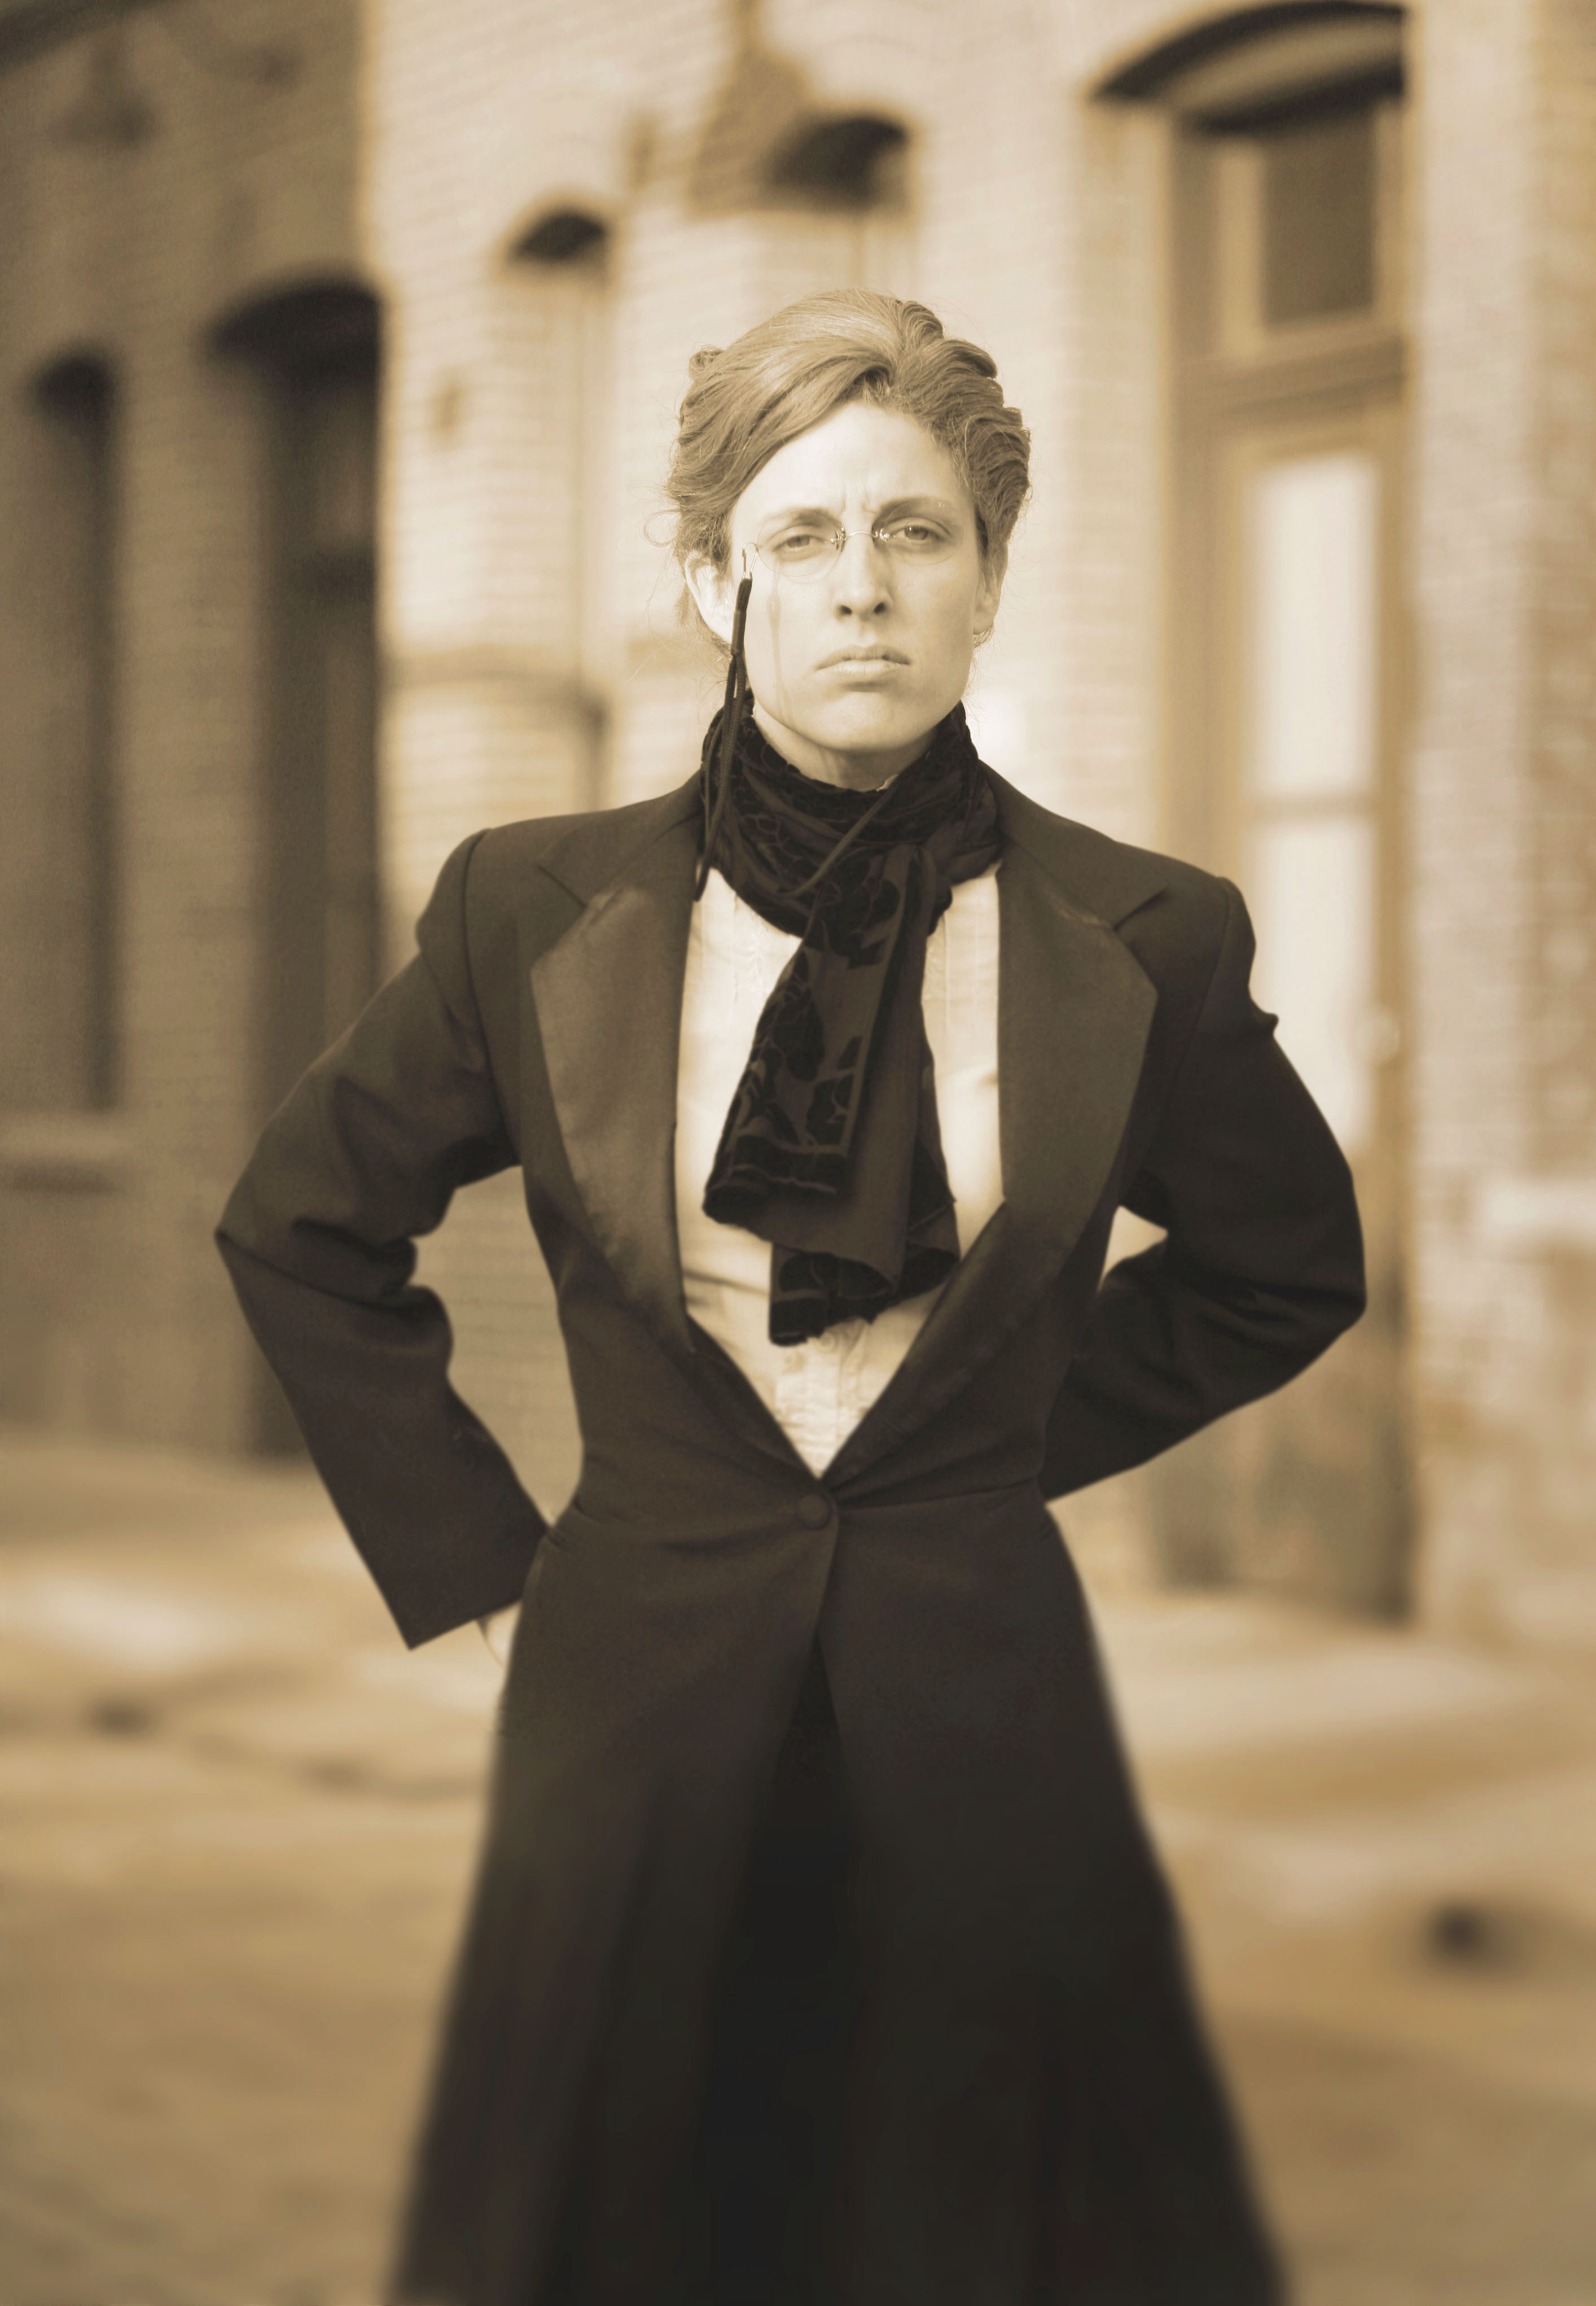 Starred as Emma Goldman in reproduction of Emma Goldman: Love, Anarchy, and Other Affairs by Jessica Litwak.